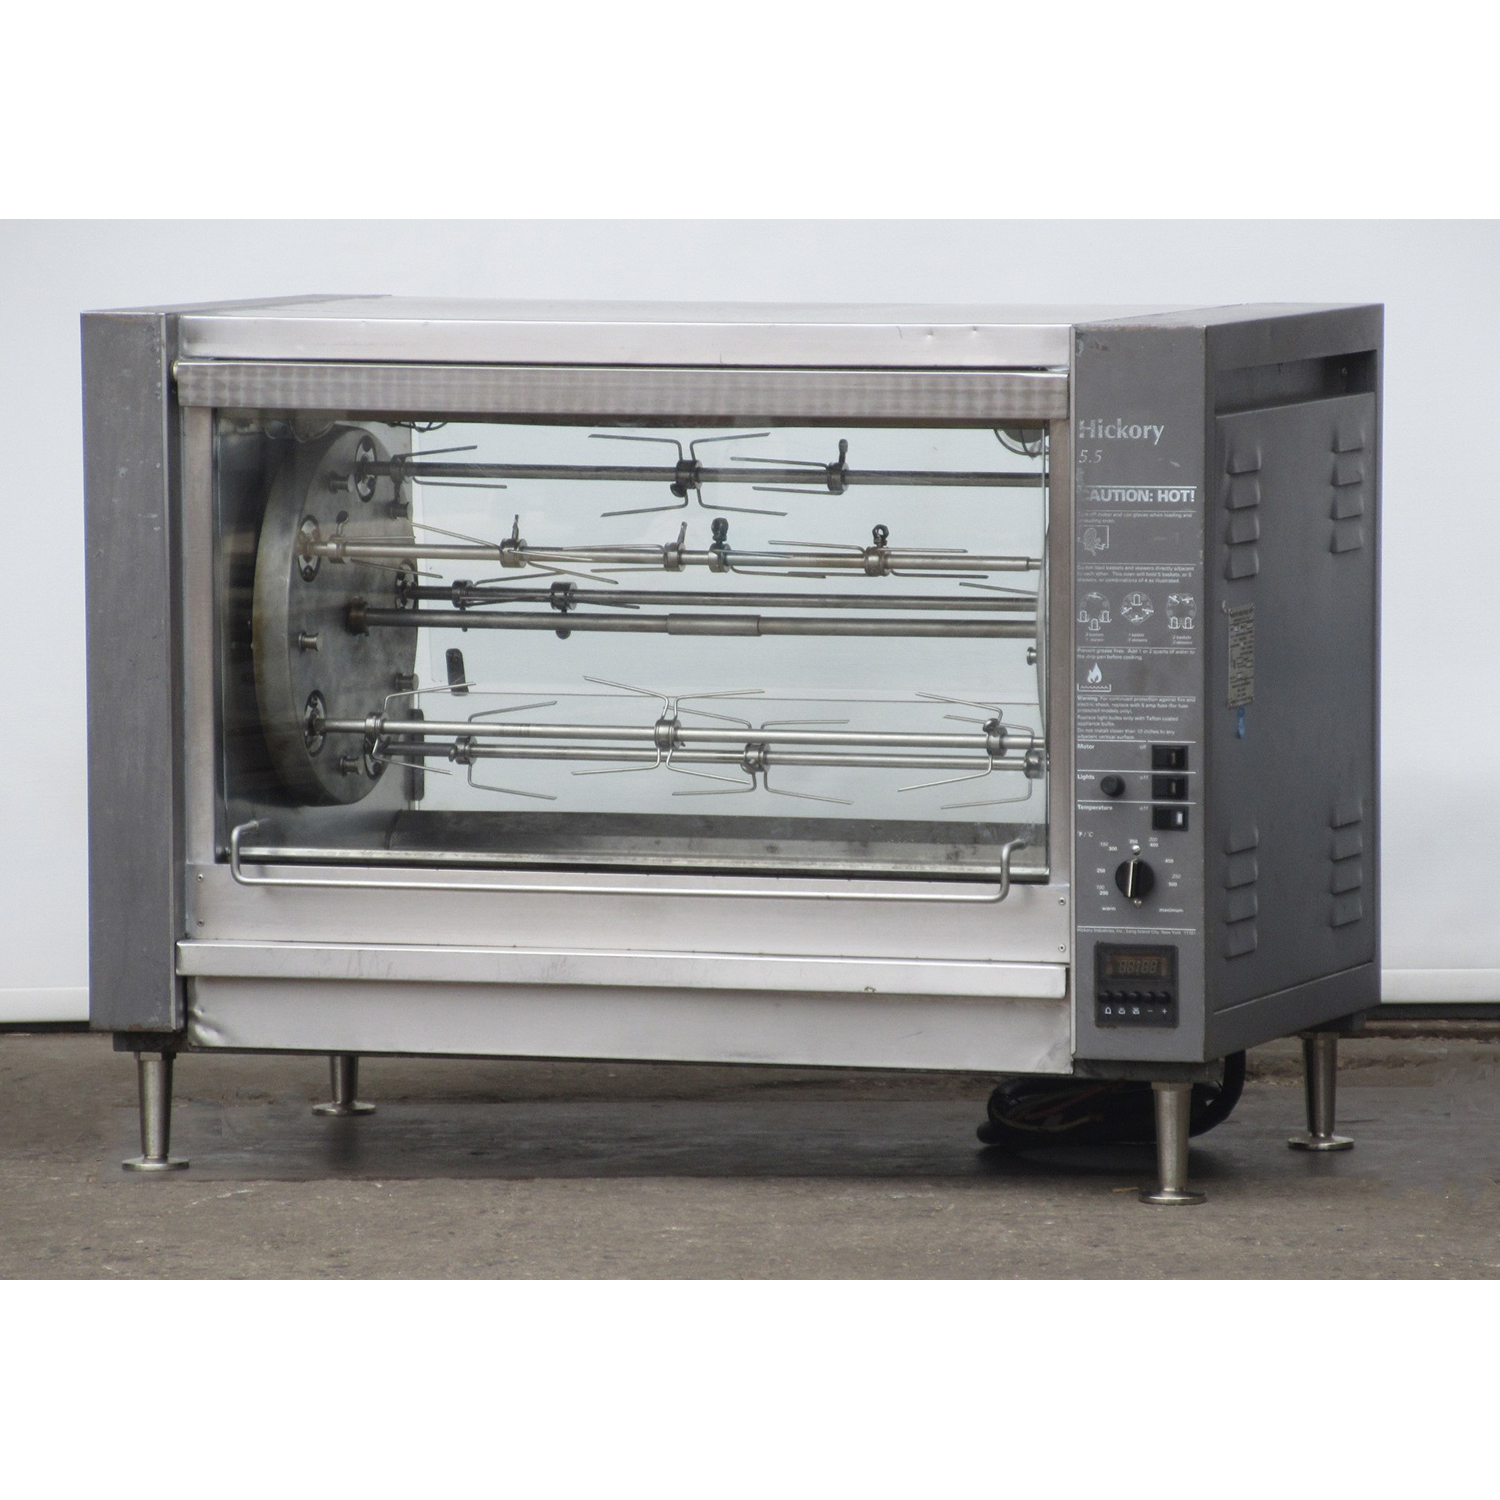 Hickory N/5.5 E Rotisserie 5 Spit, Electric, Used Excellent Condition